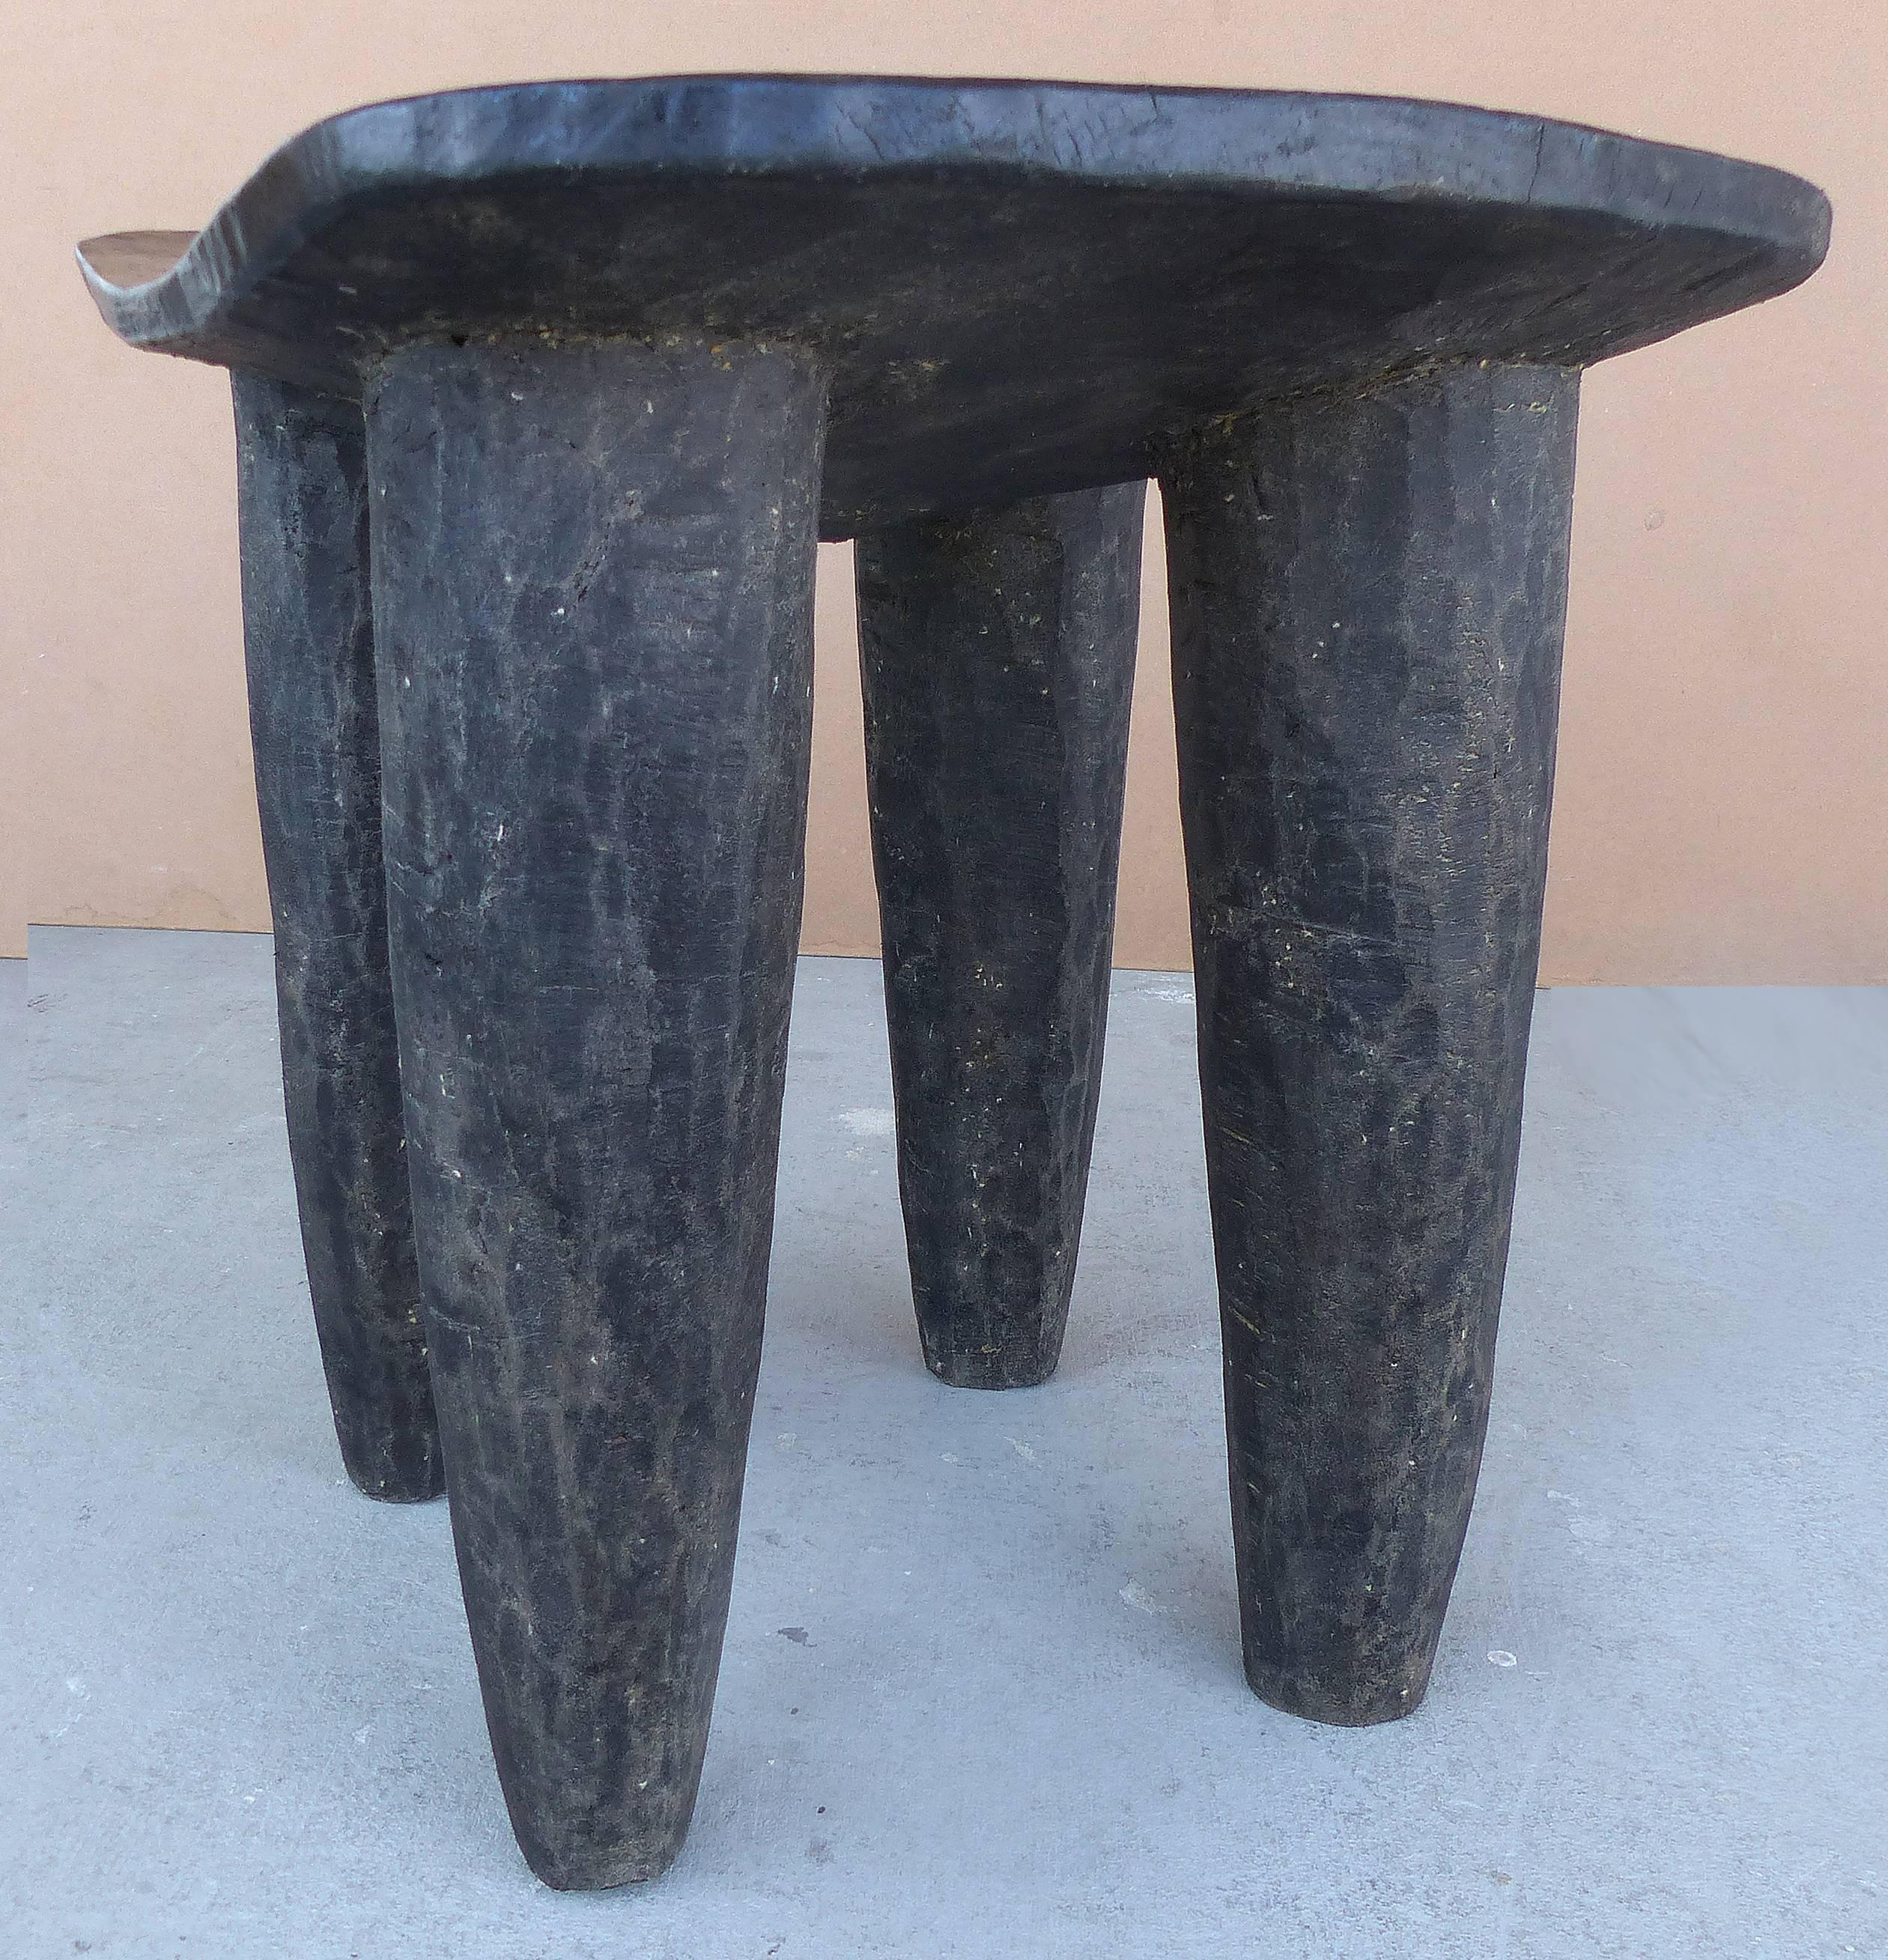 Tribal African Hand-Carved Senufo Stool from the Cote d'Ivoire